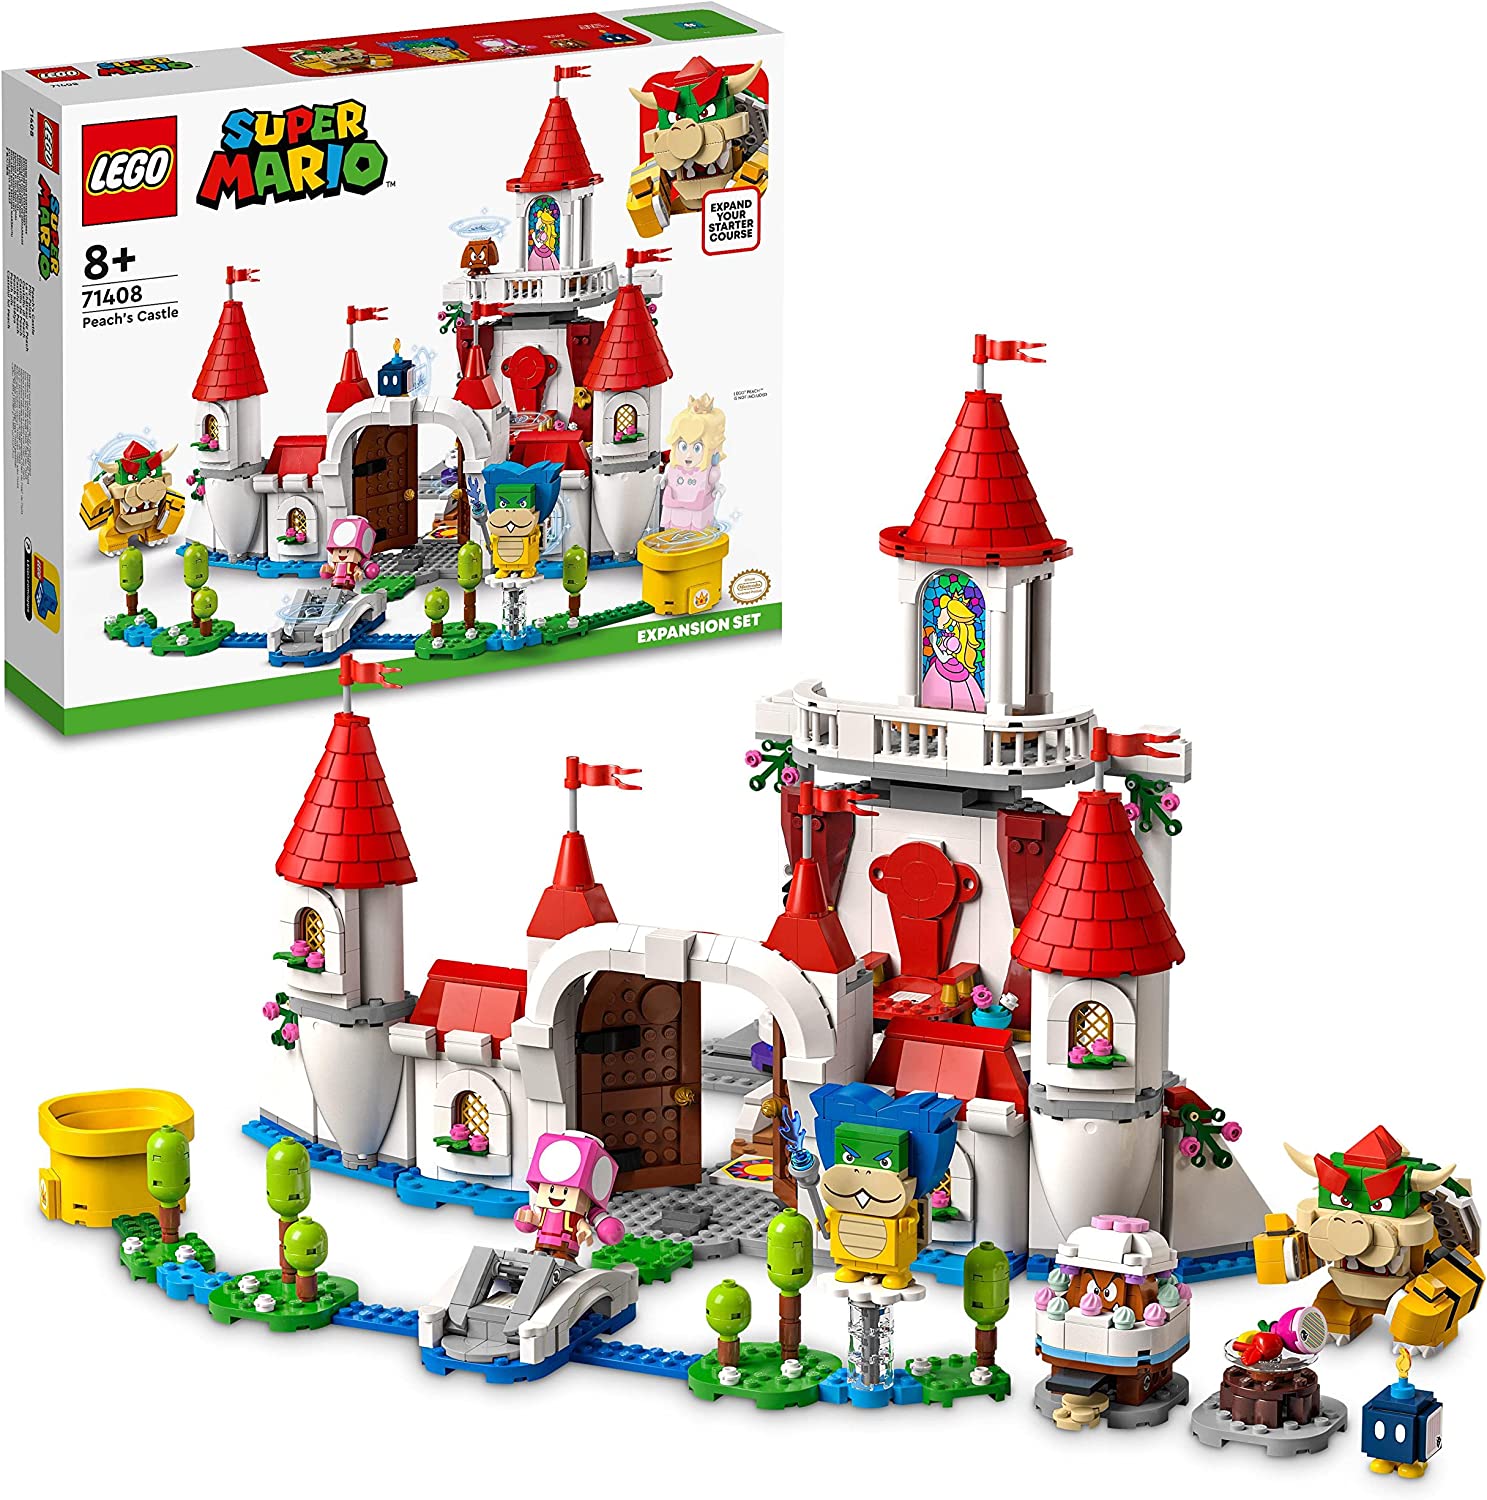 LEGO 71408 Super Mario Mushroom Palace - Expansion Set, Toy to Combine with Starter Set, Time Block with Bowser, Ludwig, Toadette and Gumba Figure